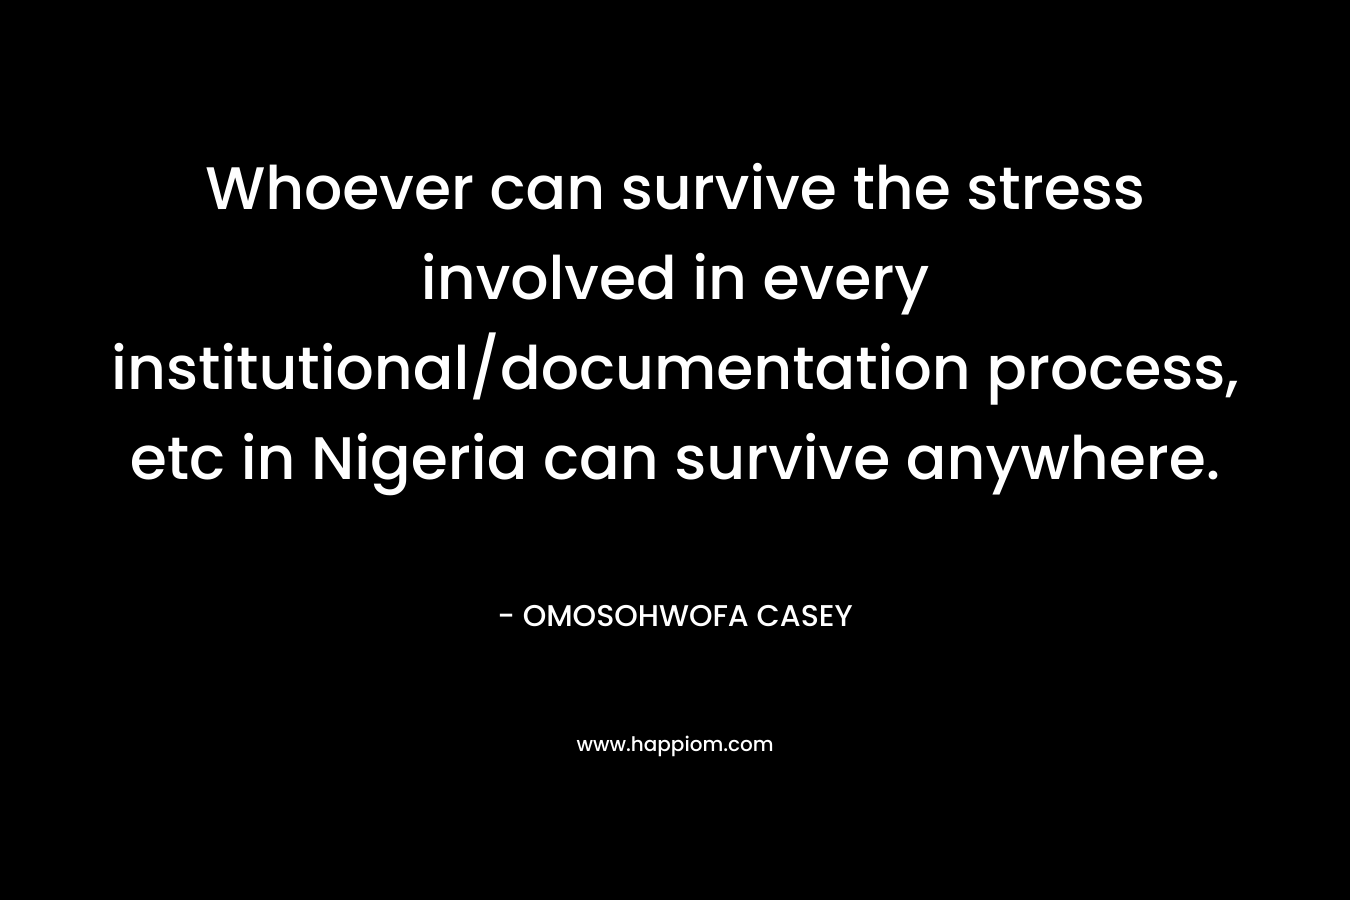 Whoever can survive the stress involved in every institutional/documentation process, etc in Nigeria can survive anywhere.